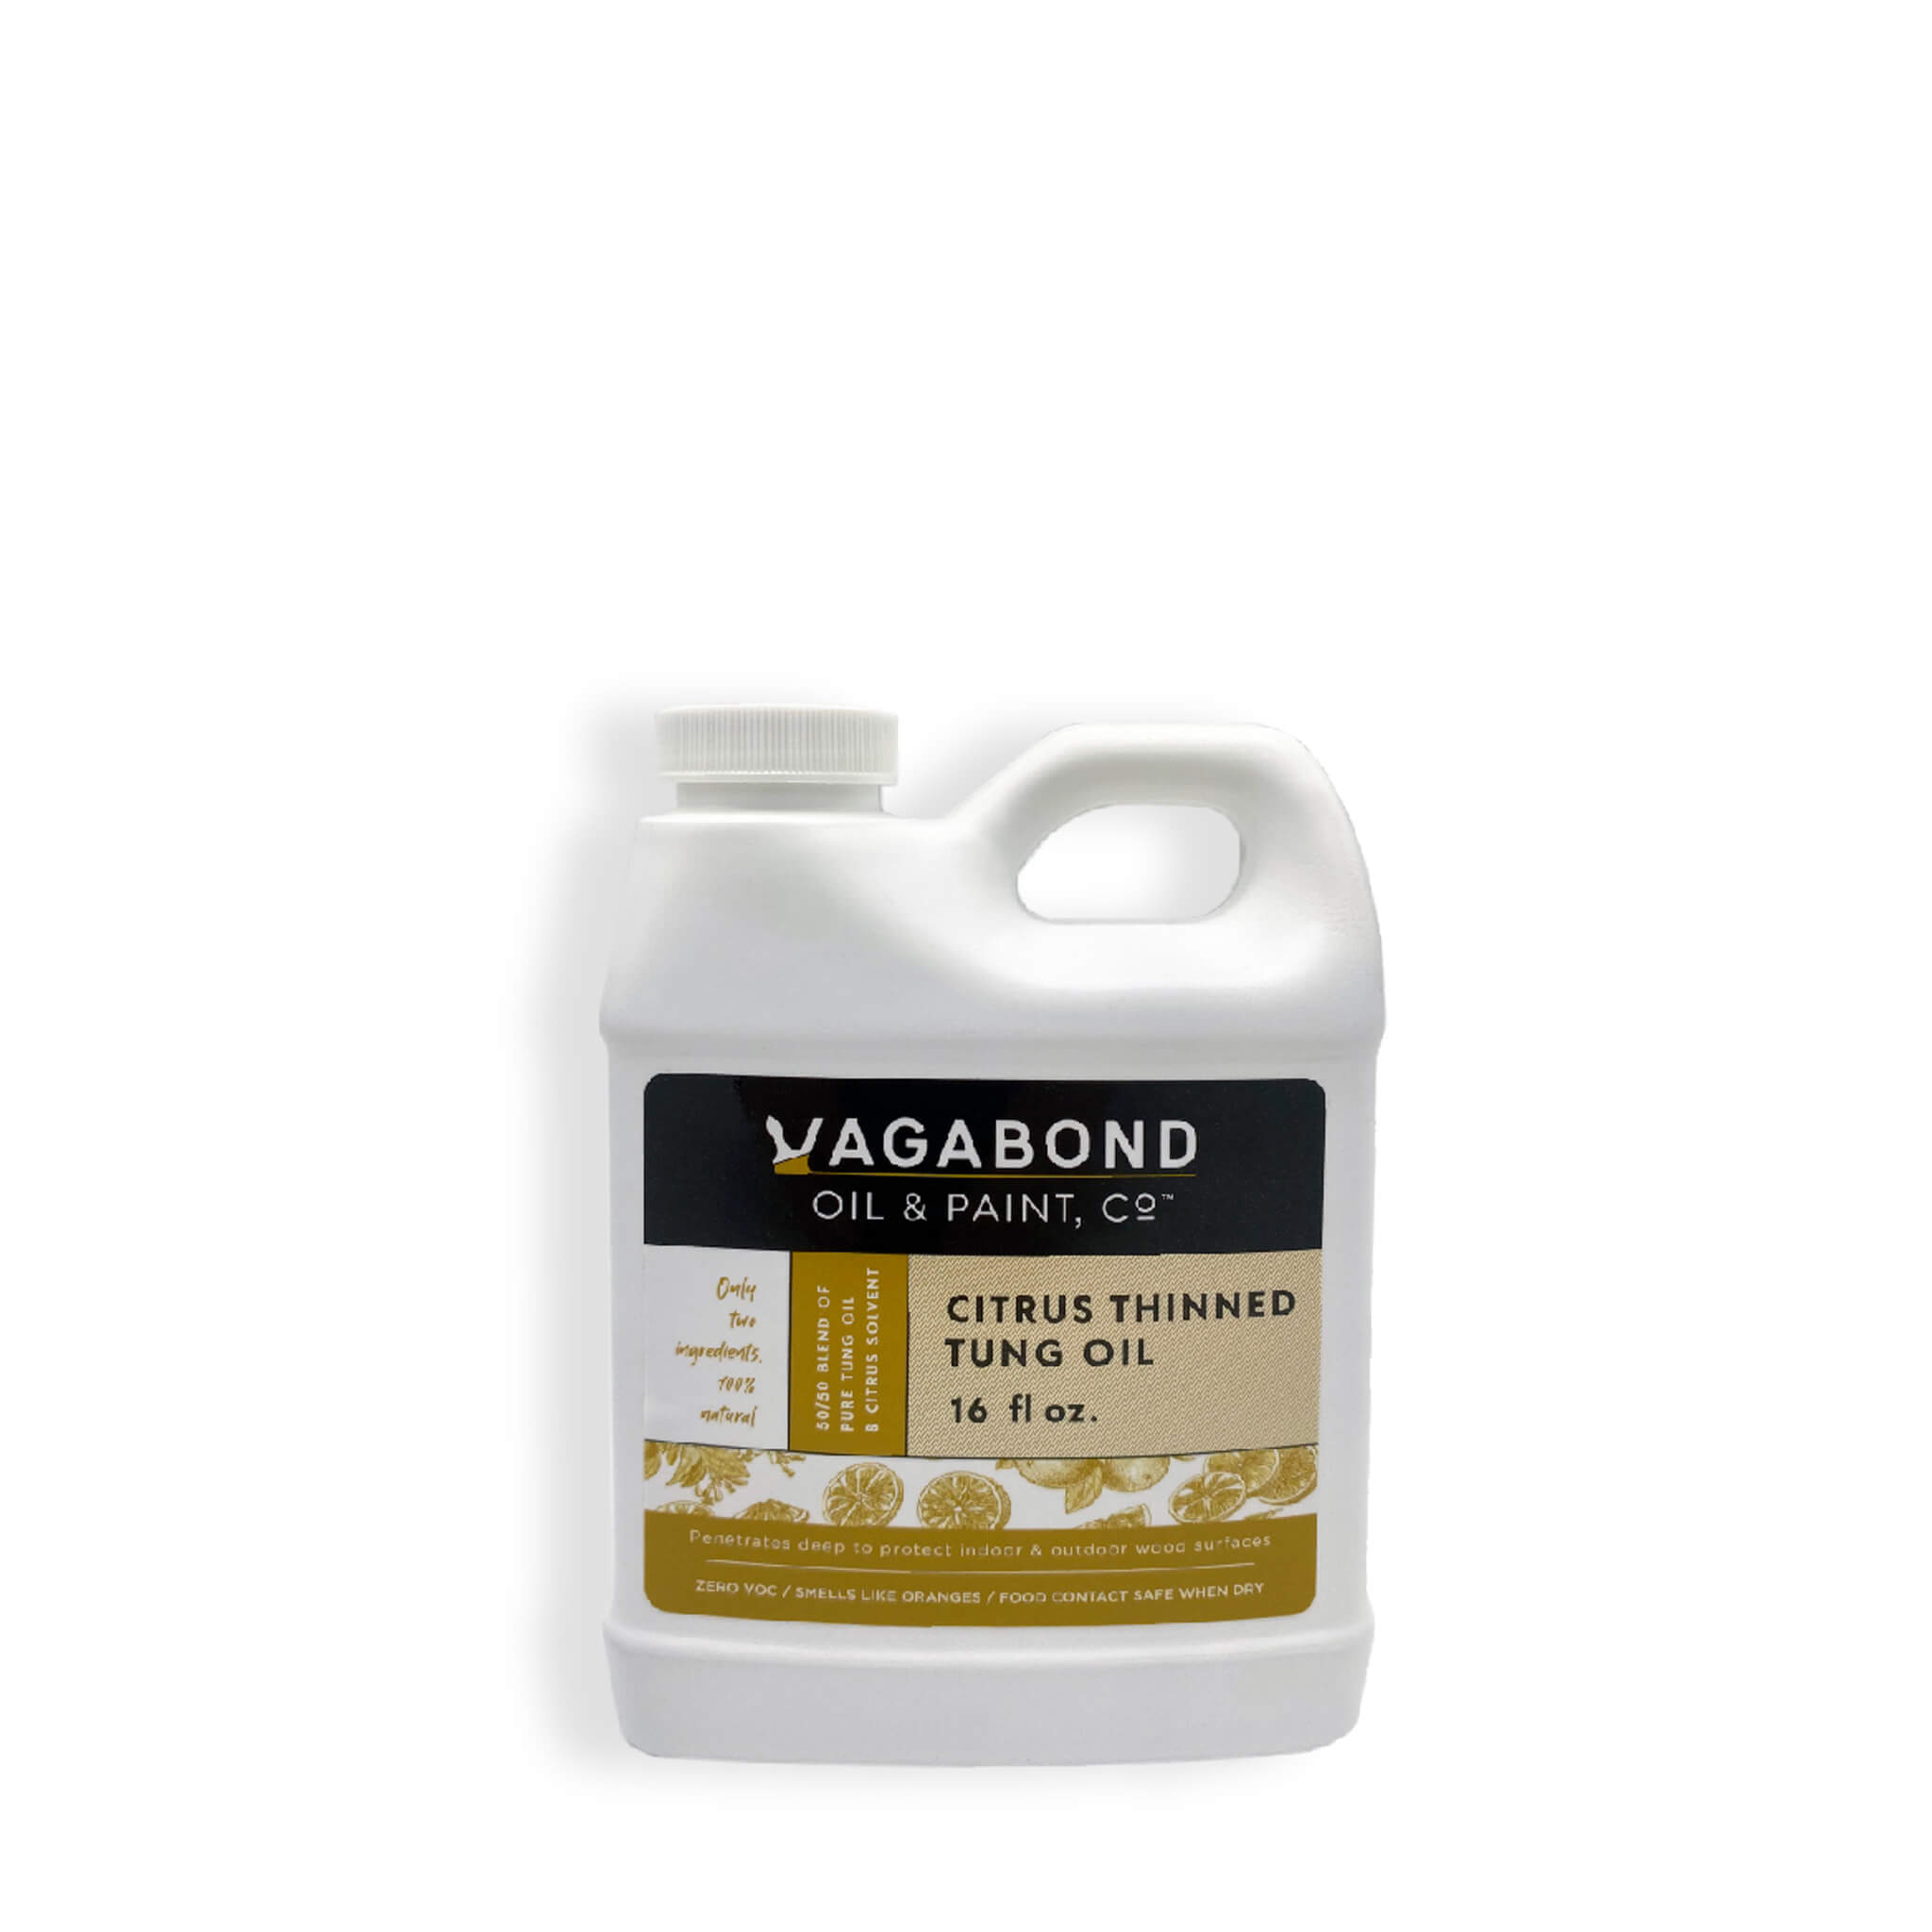 Citrus Thinned Tung Oil: Fast-drying Wood Finish for Indoor and Outdoor Use - 16Fluid Ounces | Vagabond Oil & Paint, Co.